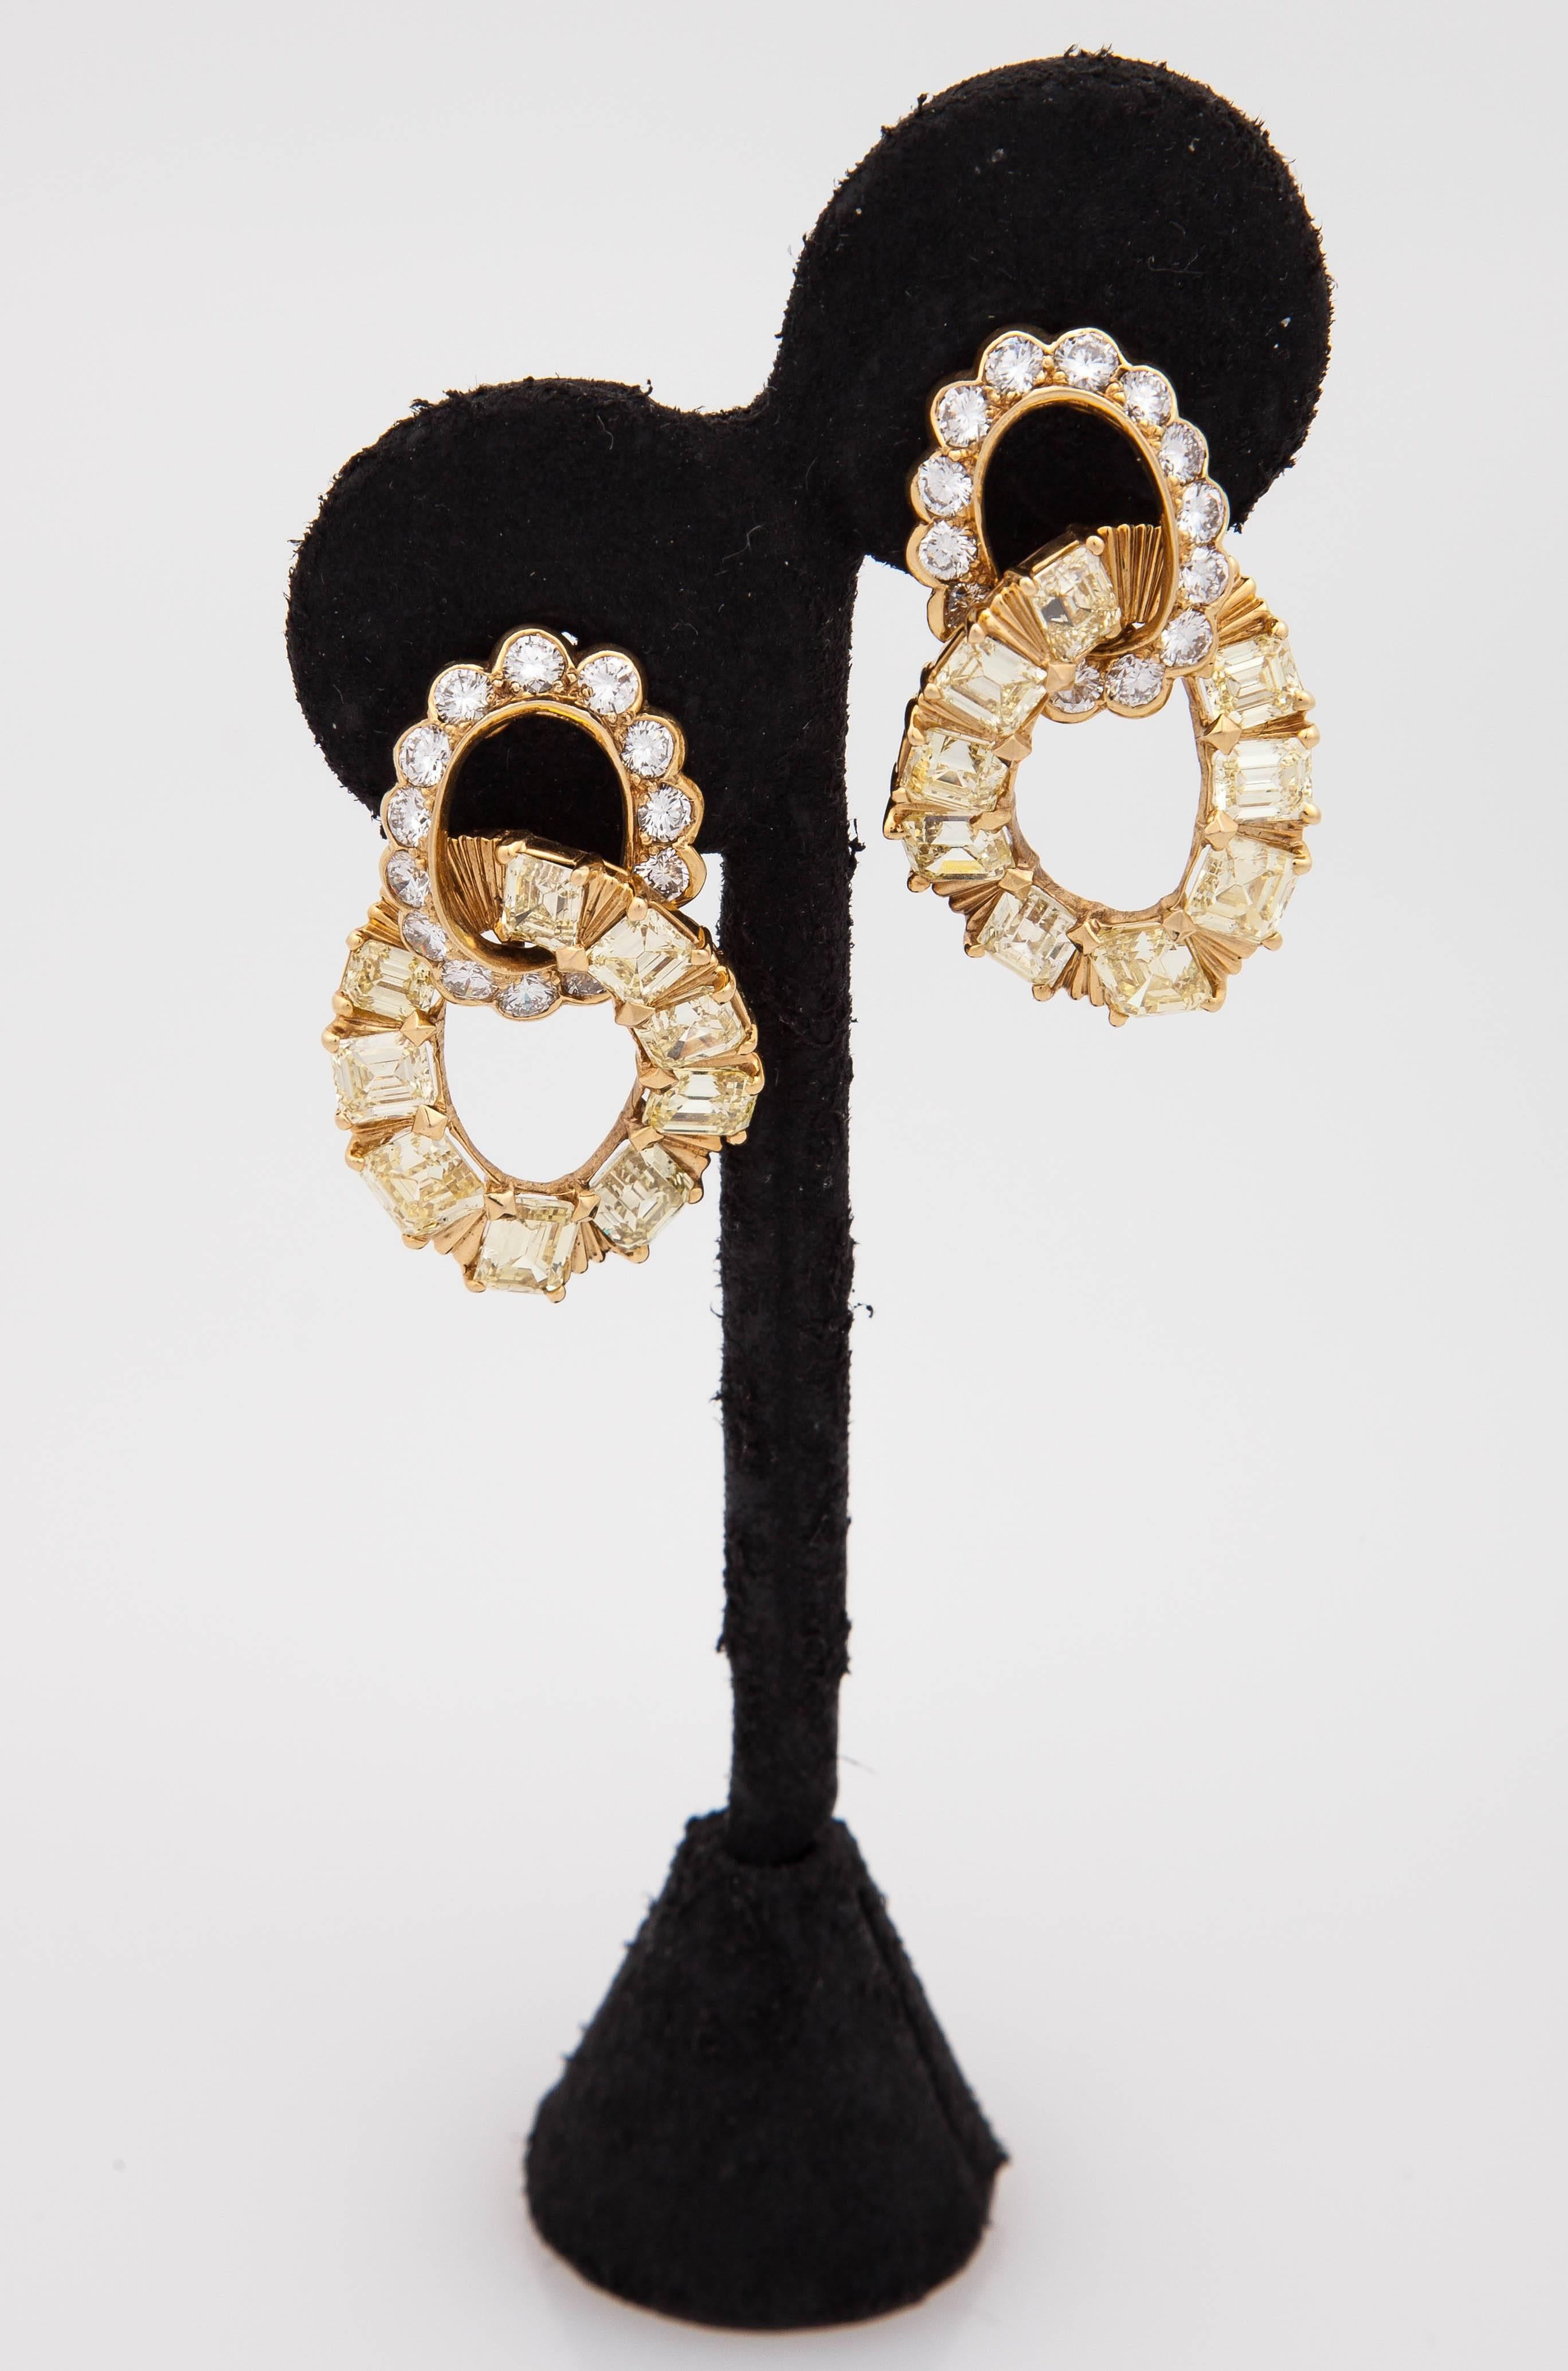 Van Cleef & Arpels White and Yellow Diamond Door Knockers Earrings In Excellent Condition For Sale In New York, NY